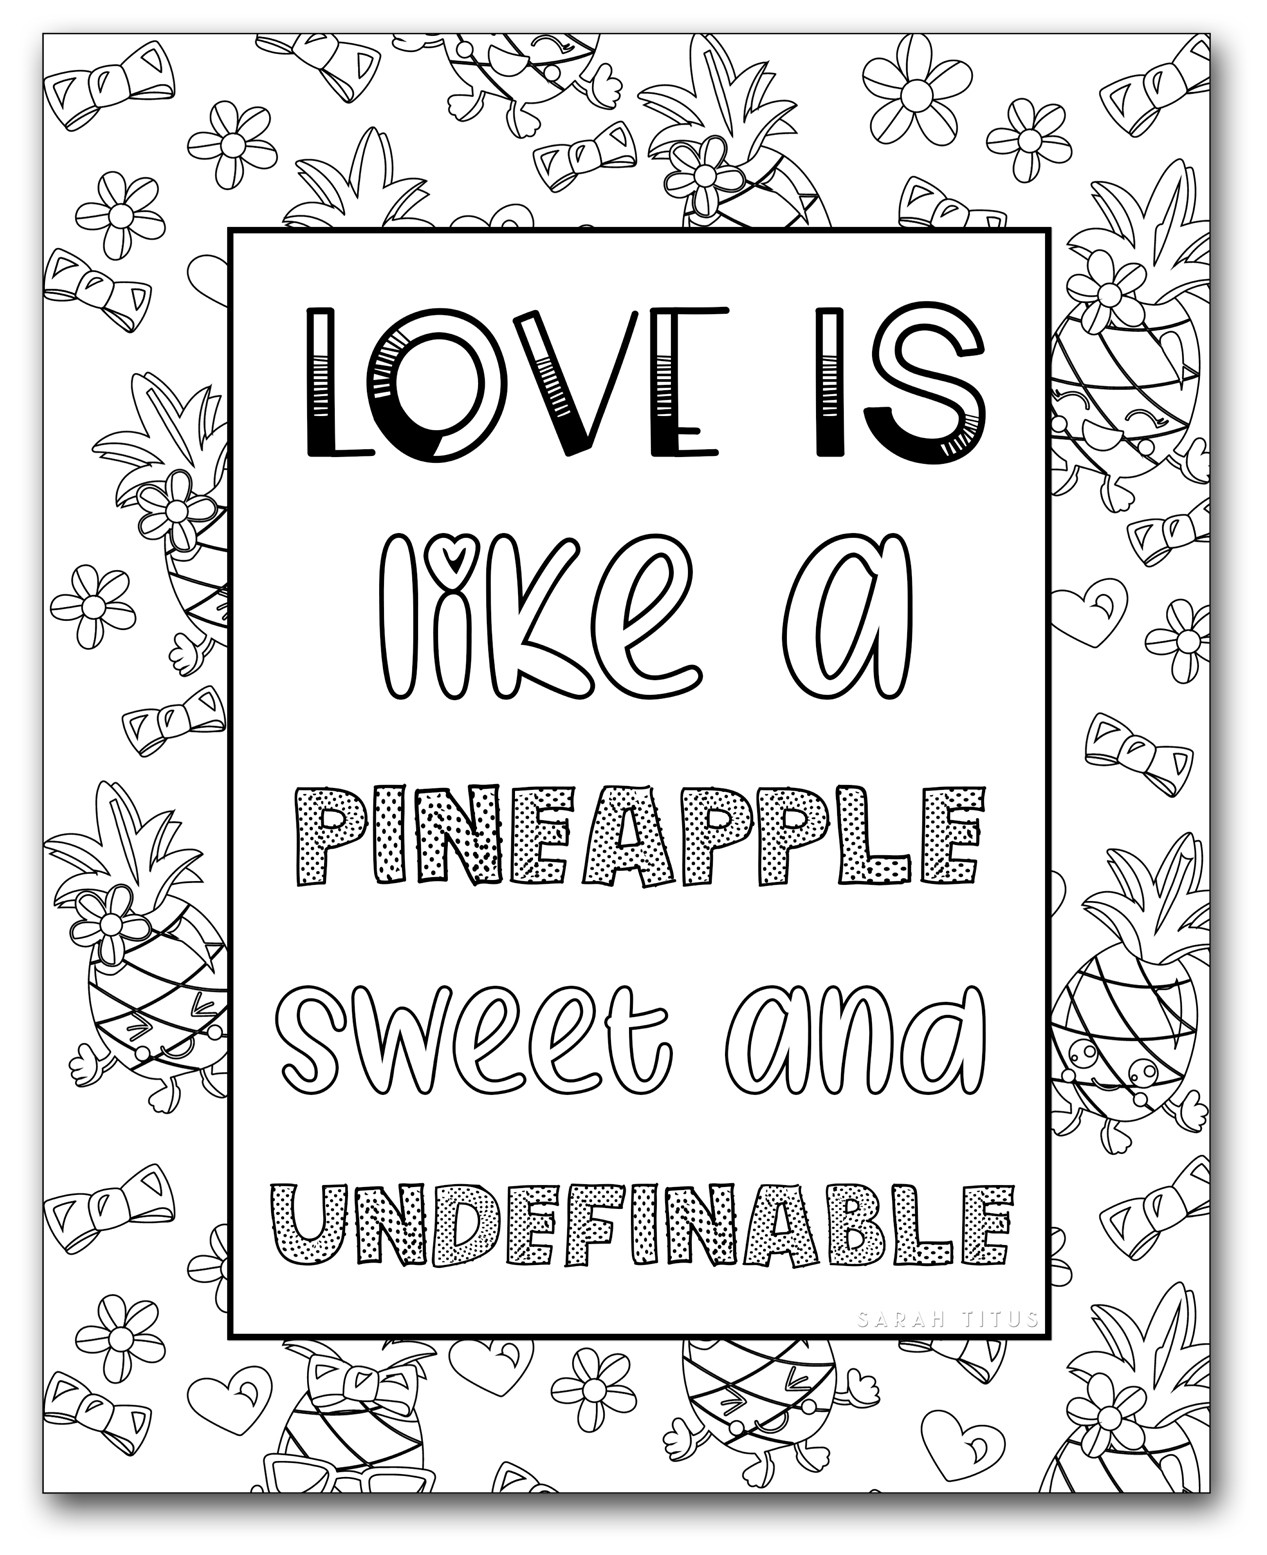 Free Printable Coloring Pages For Girls
 Printable Coloring Pages for Girls Sarah Titus